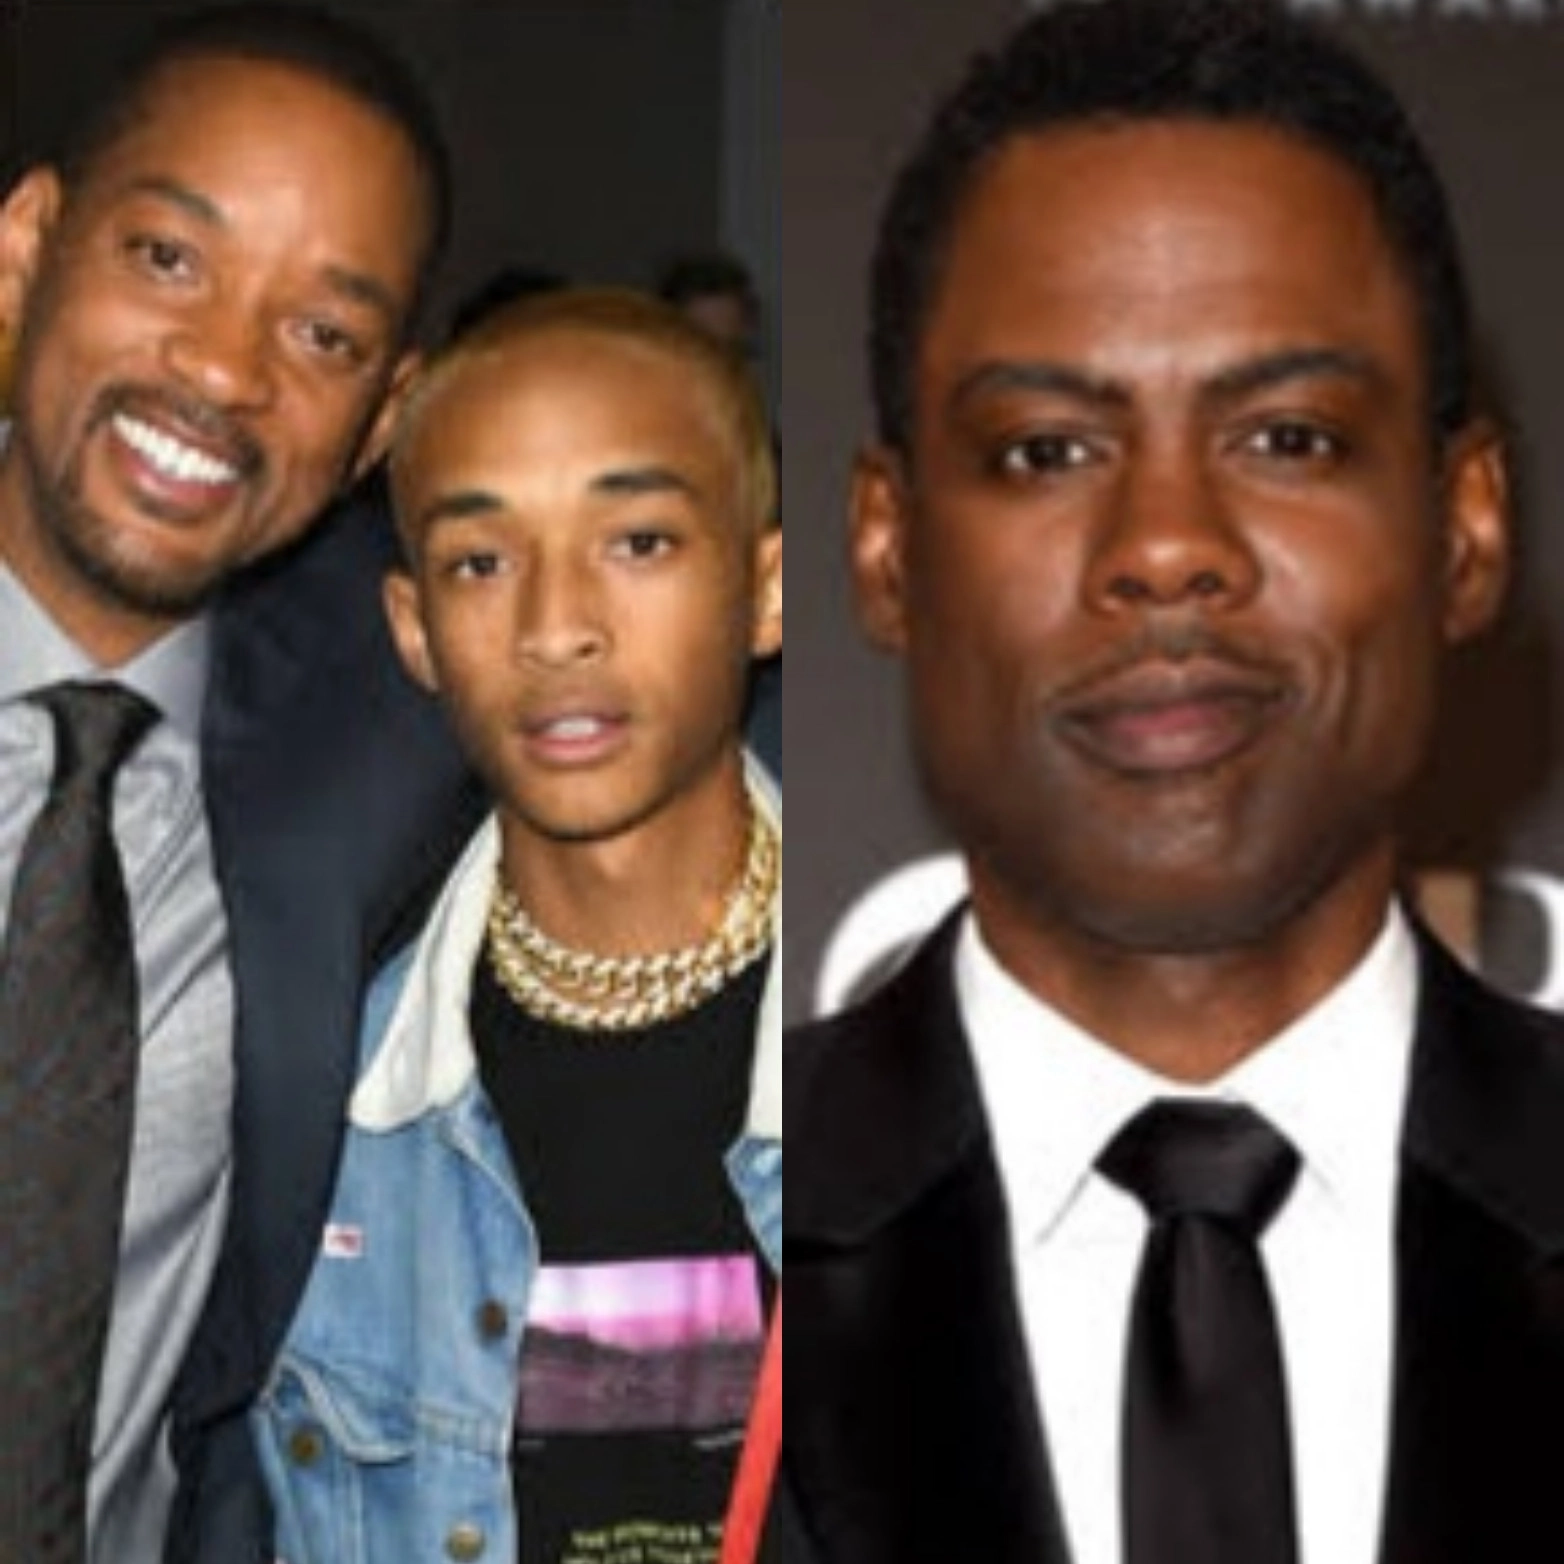 Jaden Smith reacts to his dad's assault on Chris Rock at the 2022 Oscars. 56